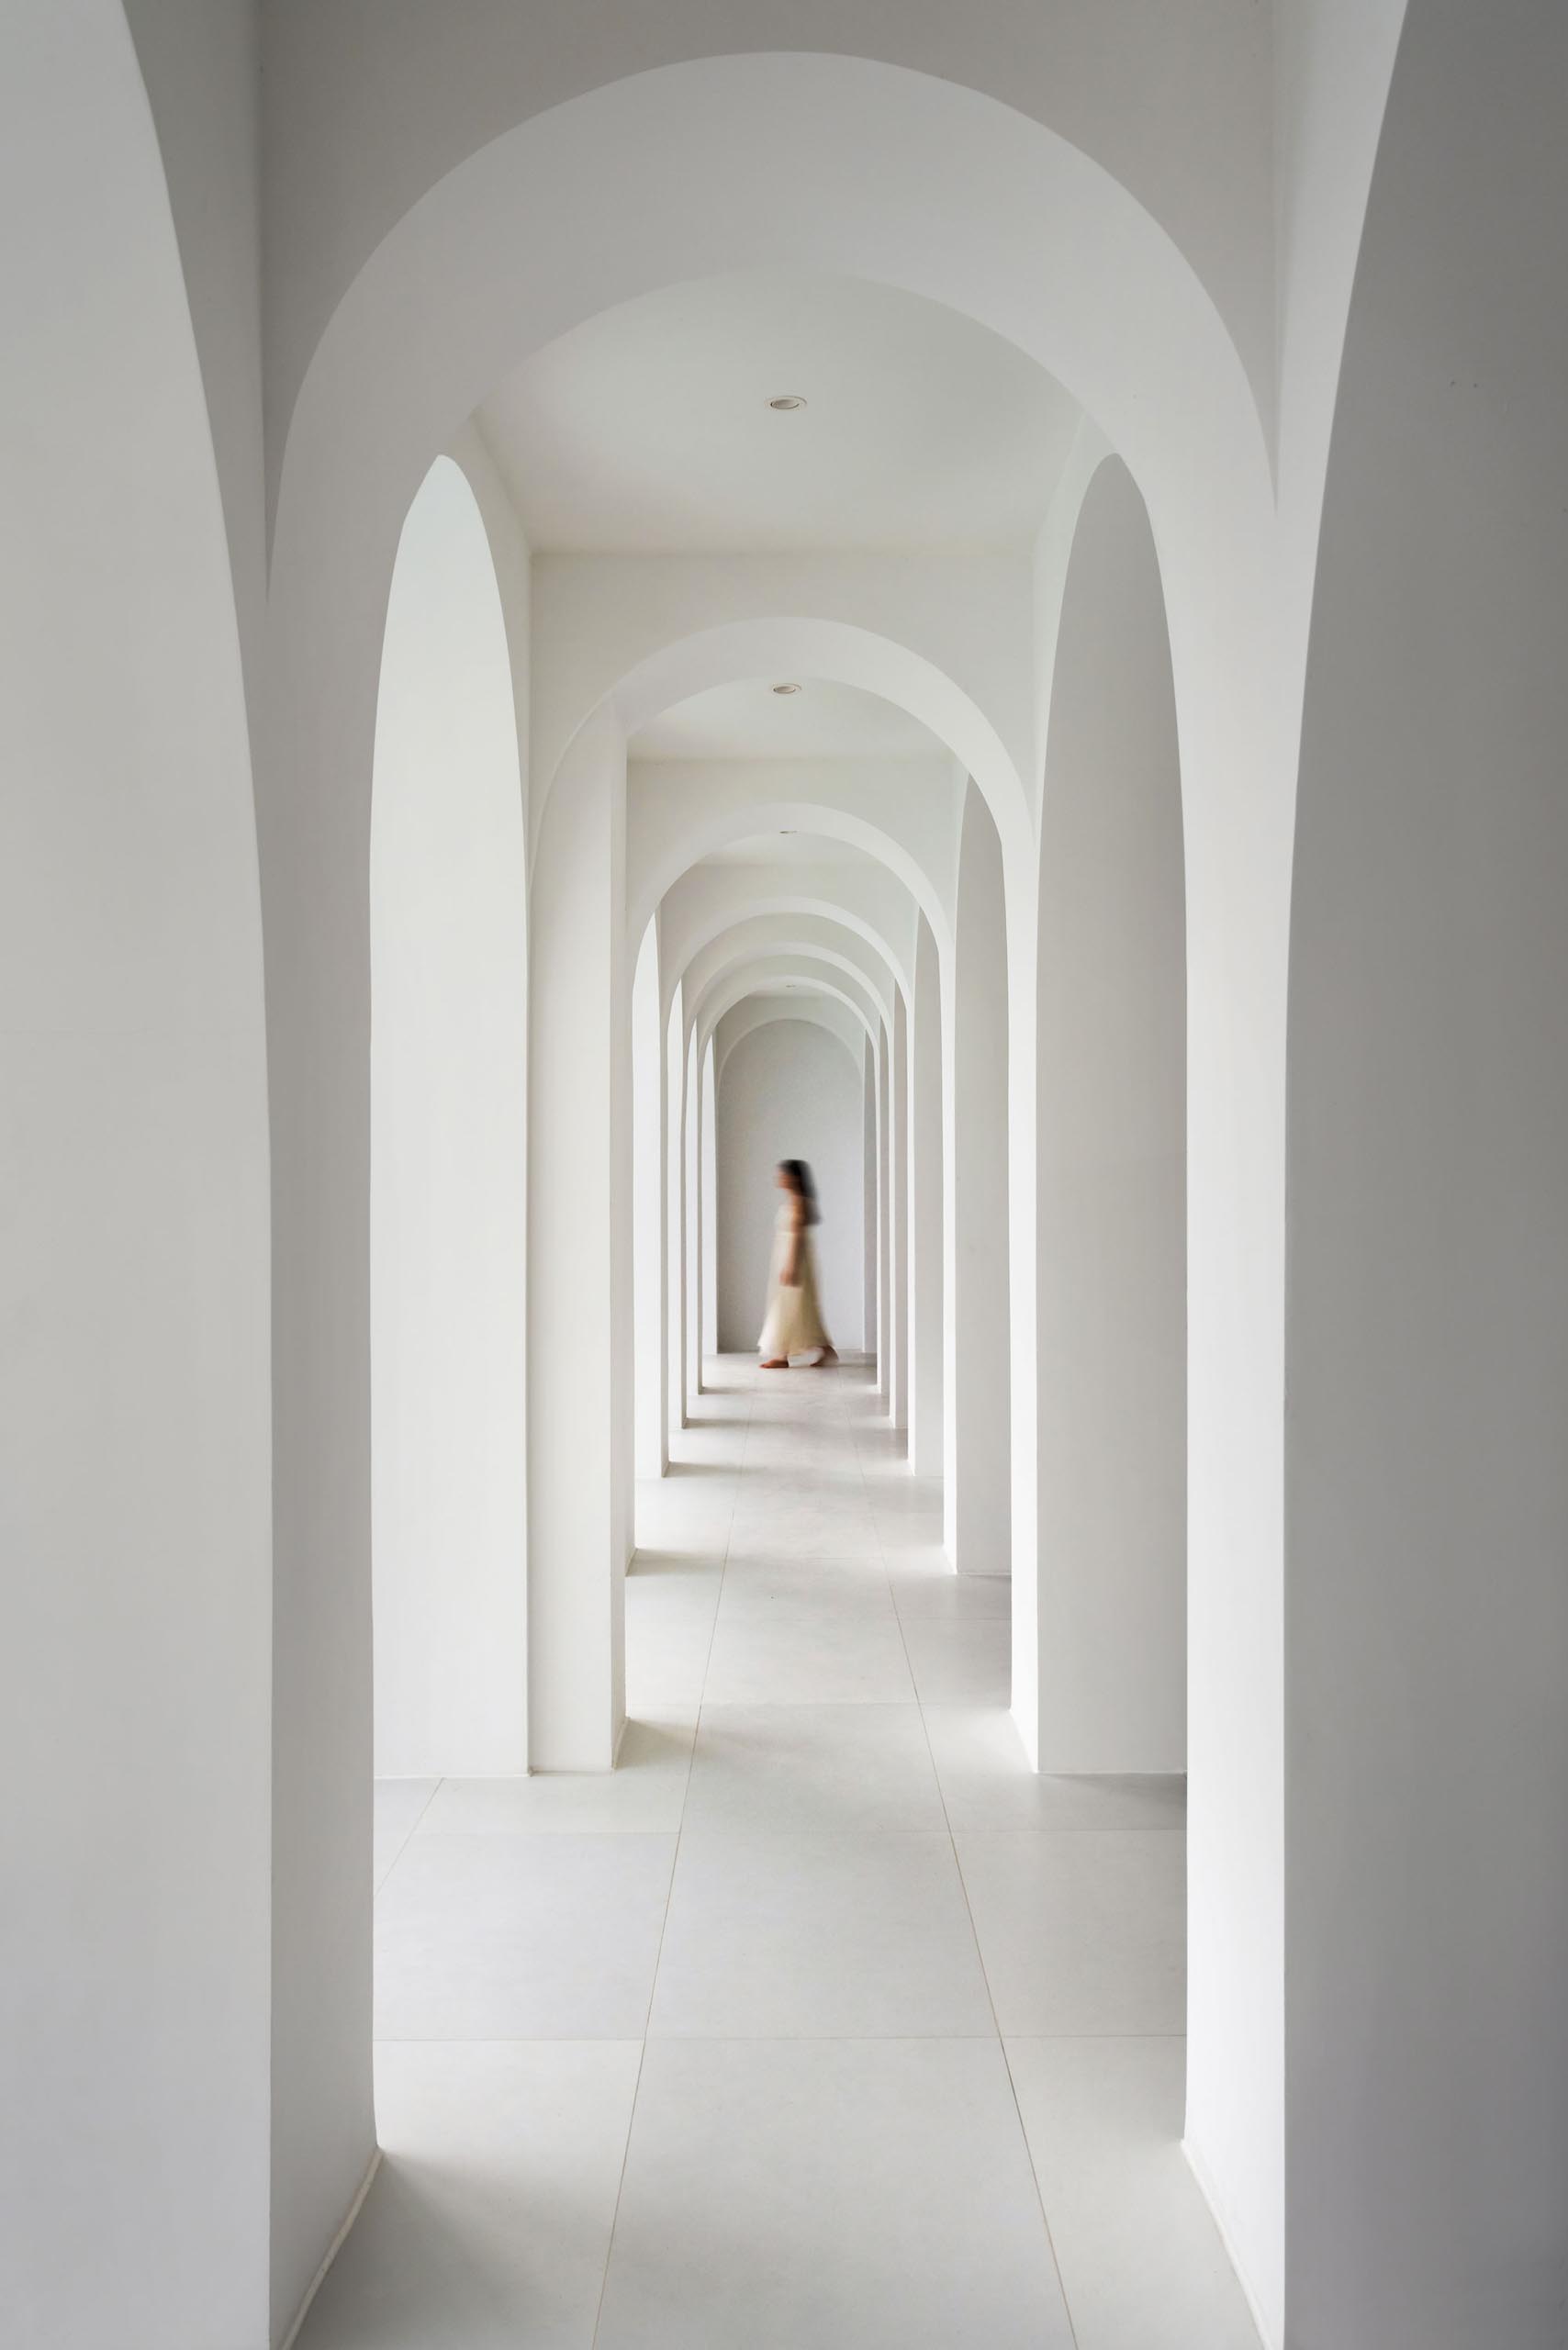 A modern walk walkway in a hotel with arches.